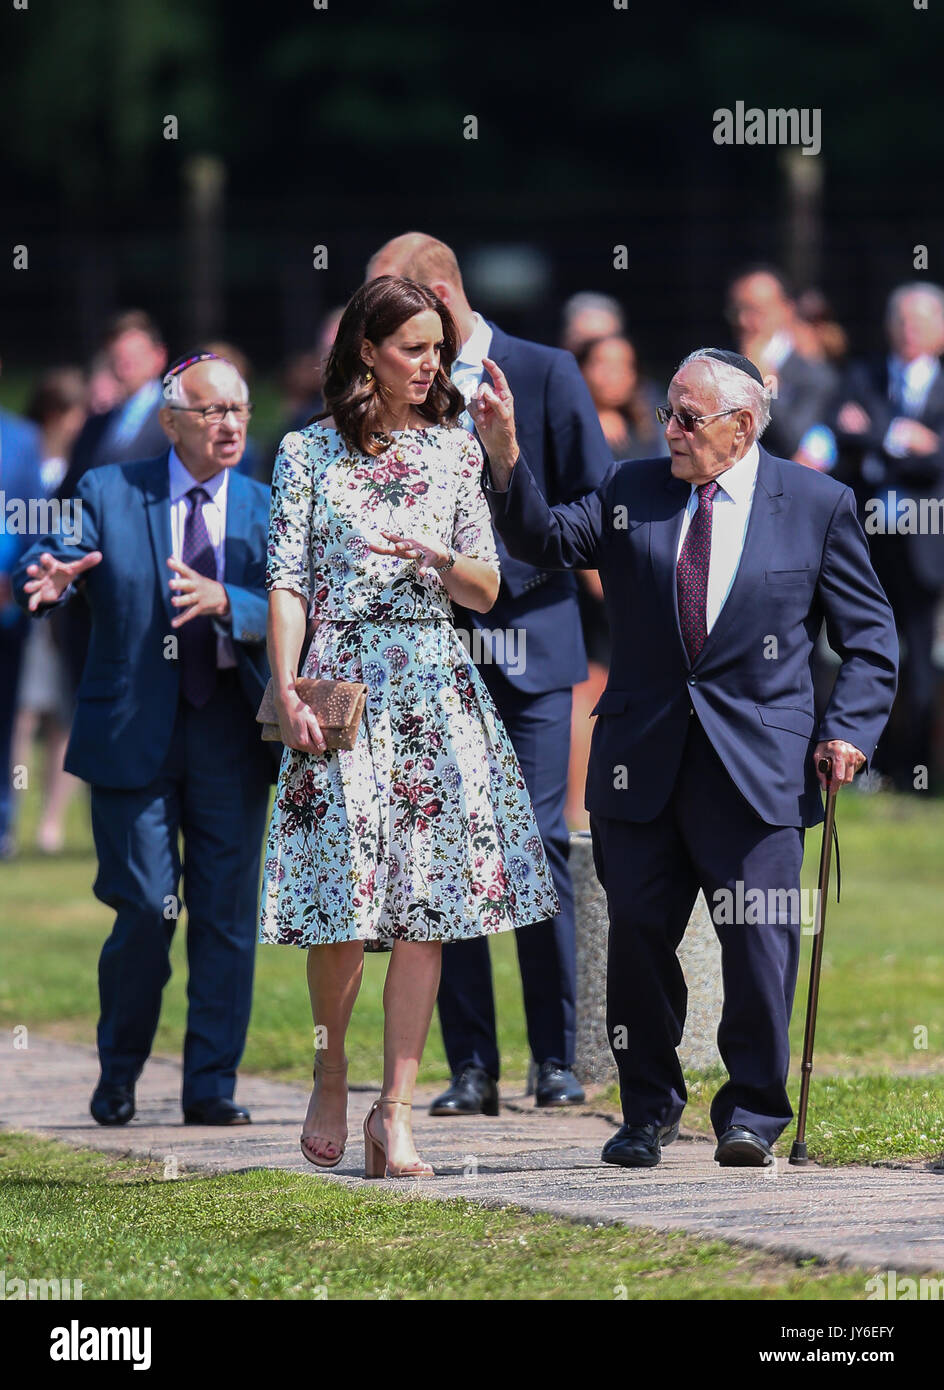 The Duke and Duchess of Cambridge visit Stutthof Concentration Camp near Gdansk during their tour of Poland and Germany  Featuring: Prince William, Duke of Cambridge, Catherine Duchess of Cambridge, Kate Middleton Where: Gdansk, Poland When: 18 Jul 2017 Credit: John Rainford/WENN.com Stock Photo